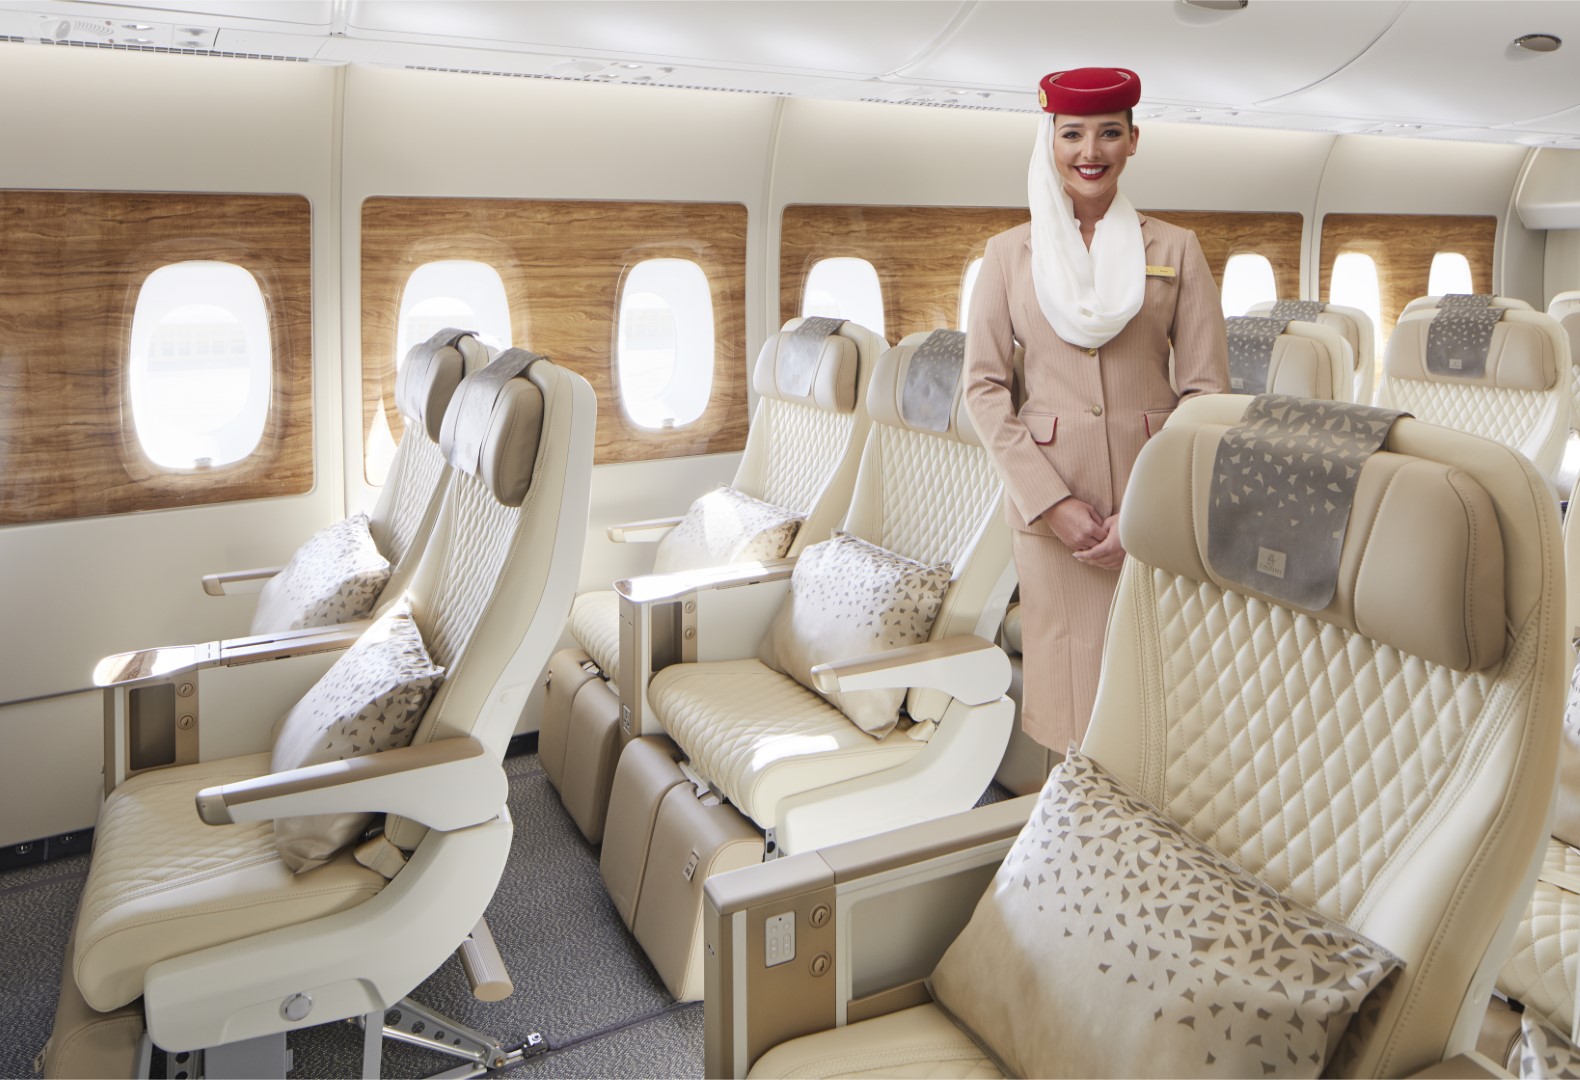 Emirates has added Premium Economy Class to its popular Airbus A380 aircraft. Click to enlarge.